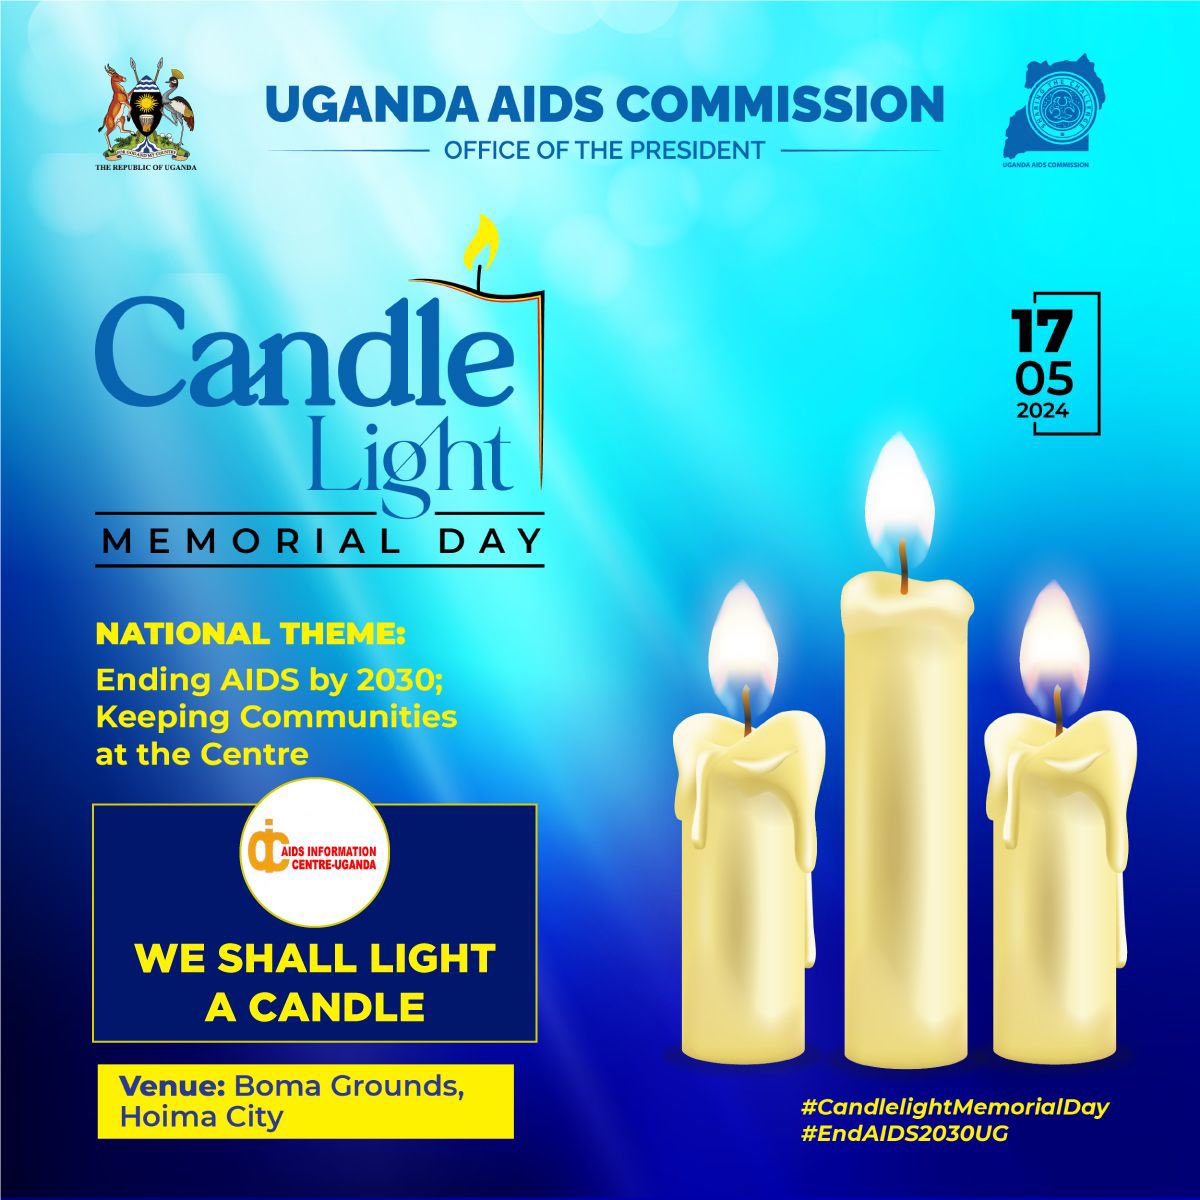 Will you light a candle with us tomorrow? #LightACandle 🕯️ #CandlelightMemorialDay #EndAIDS2030Ug